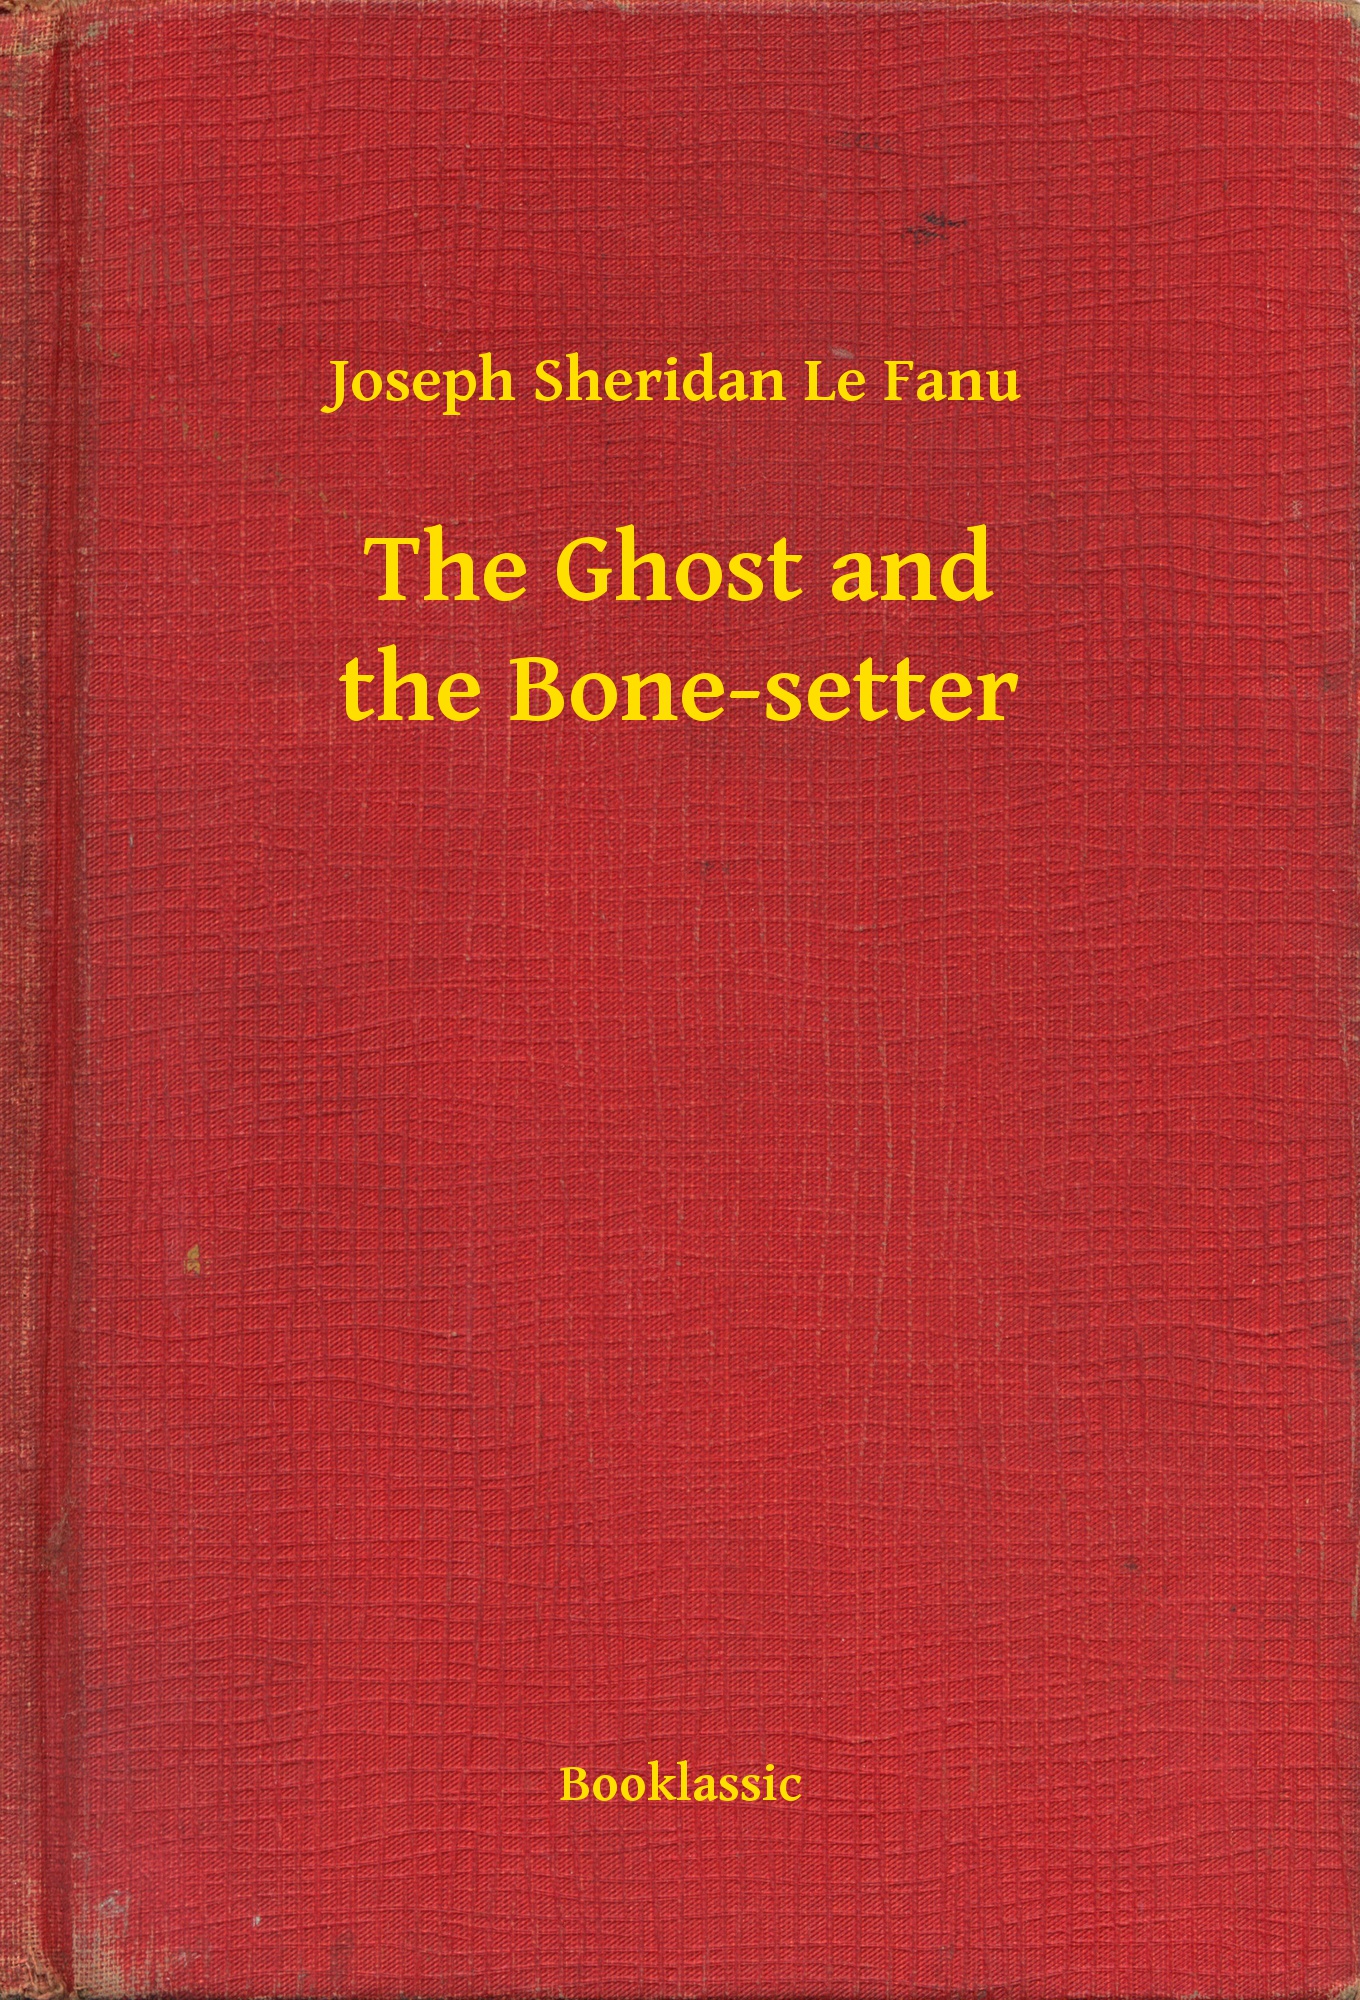 The Ghost and the Bone-setter